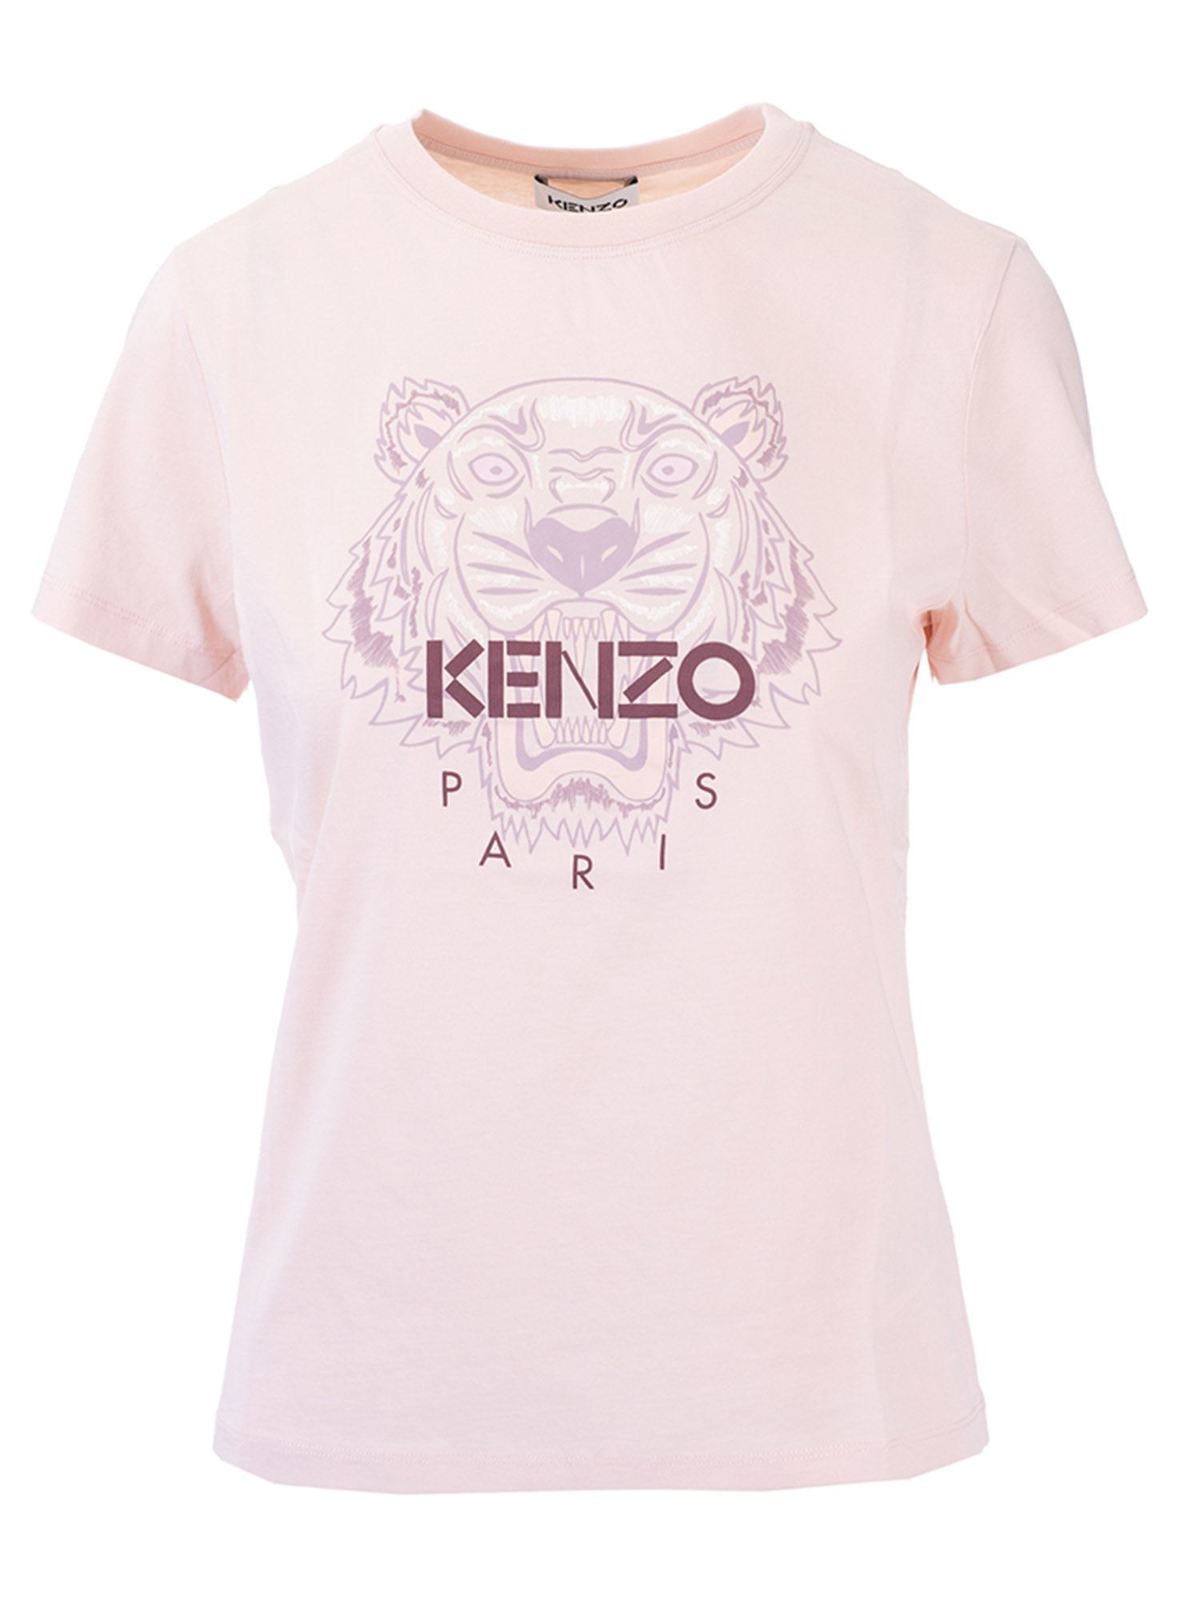 Tシャツ Kenzo - Tシャツ - ピンク - 2TS8464YB34 | THEBS [iKRIX]